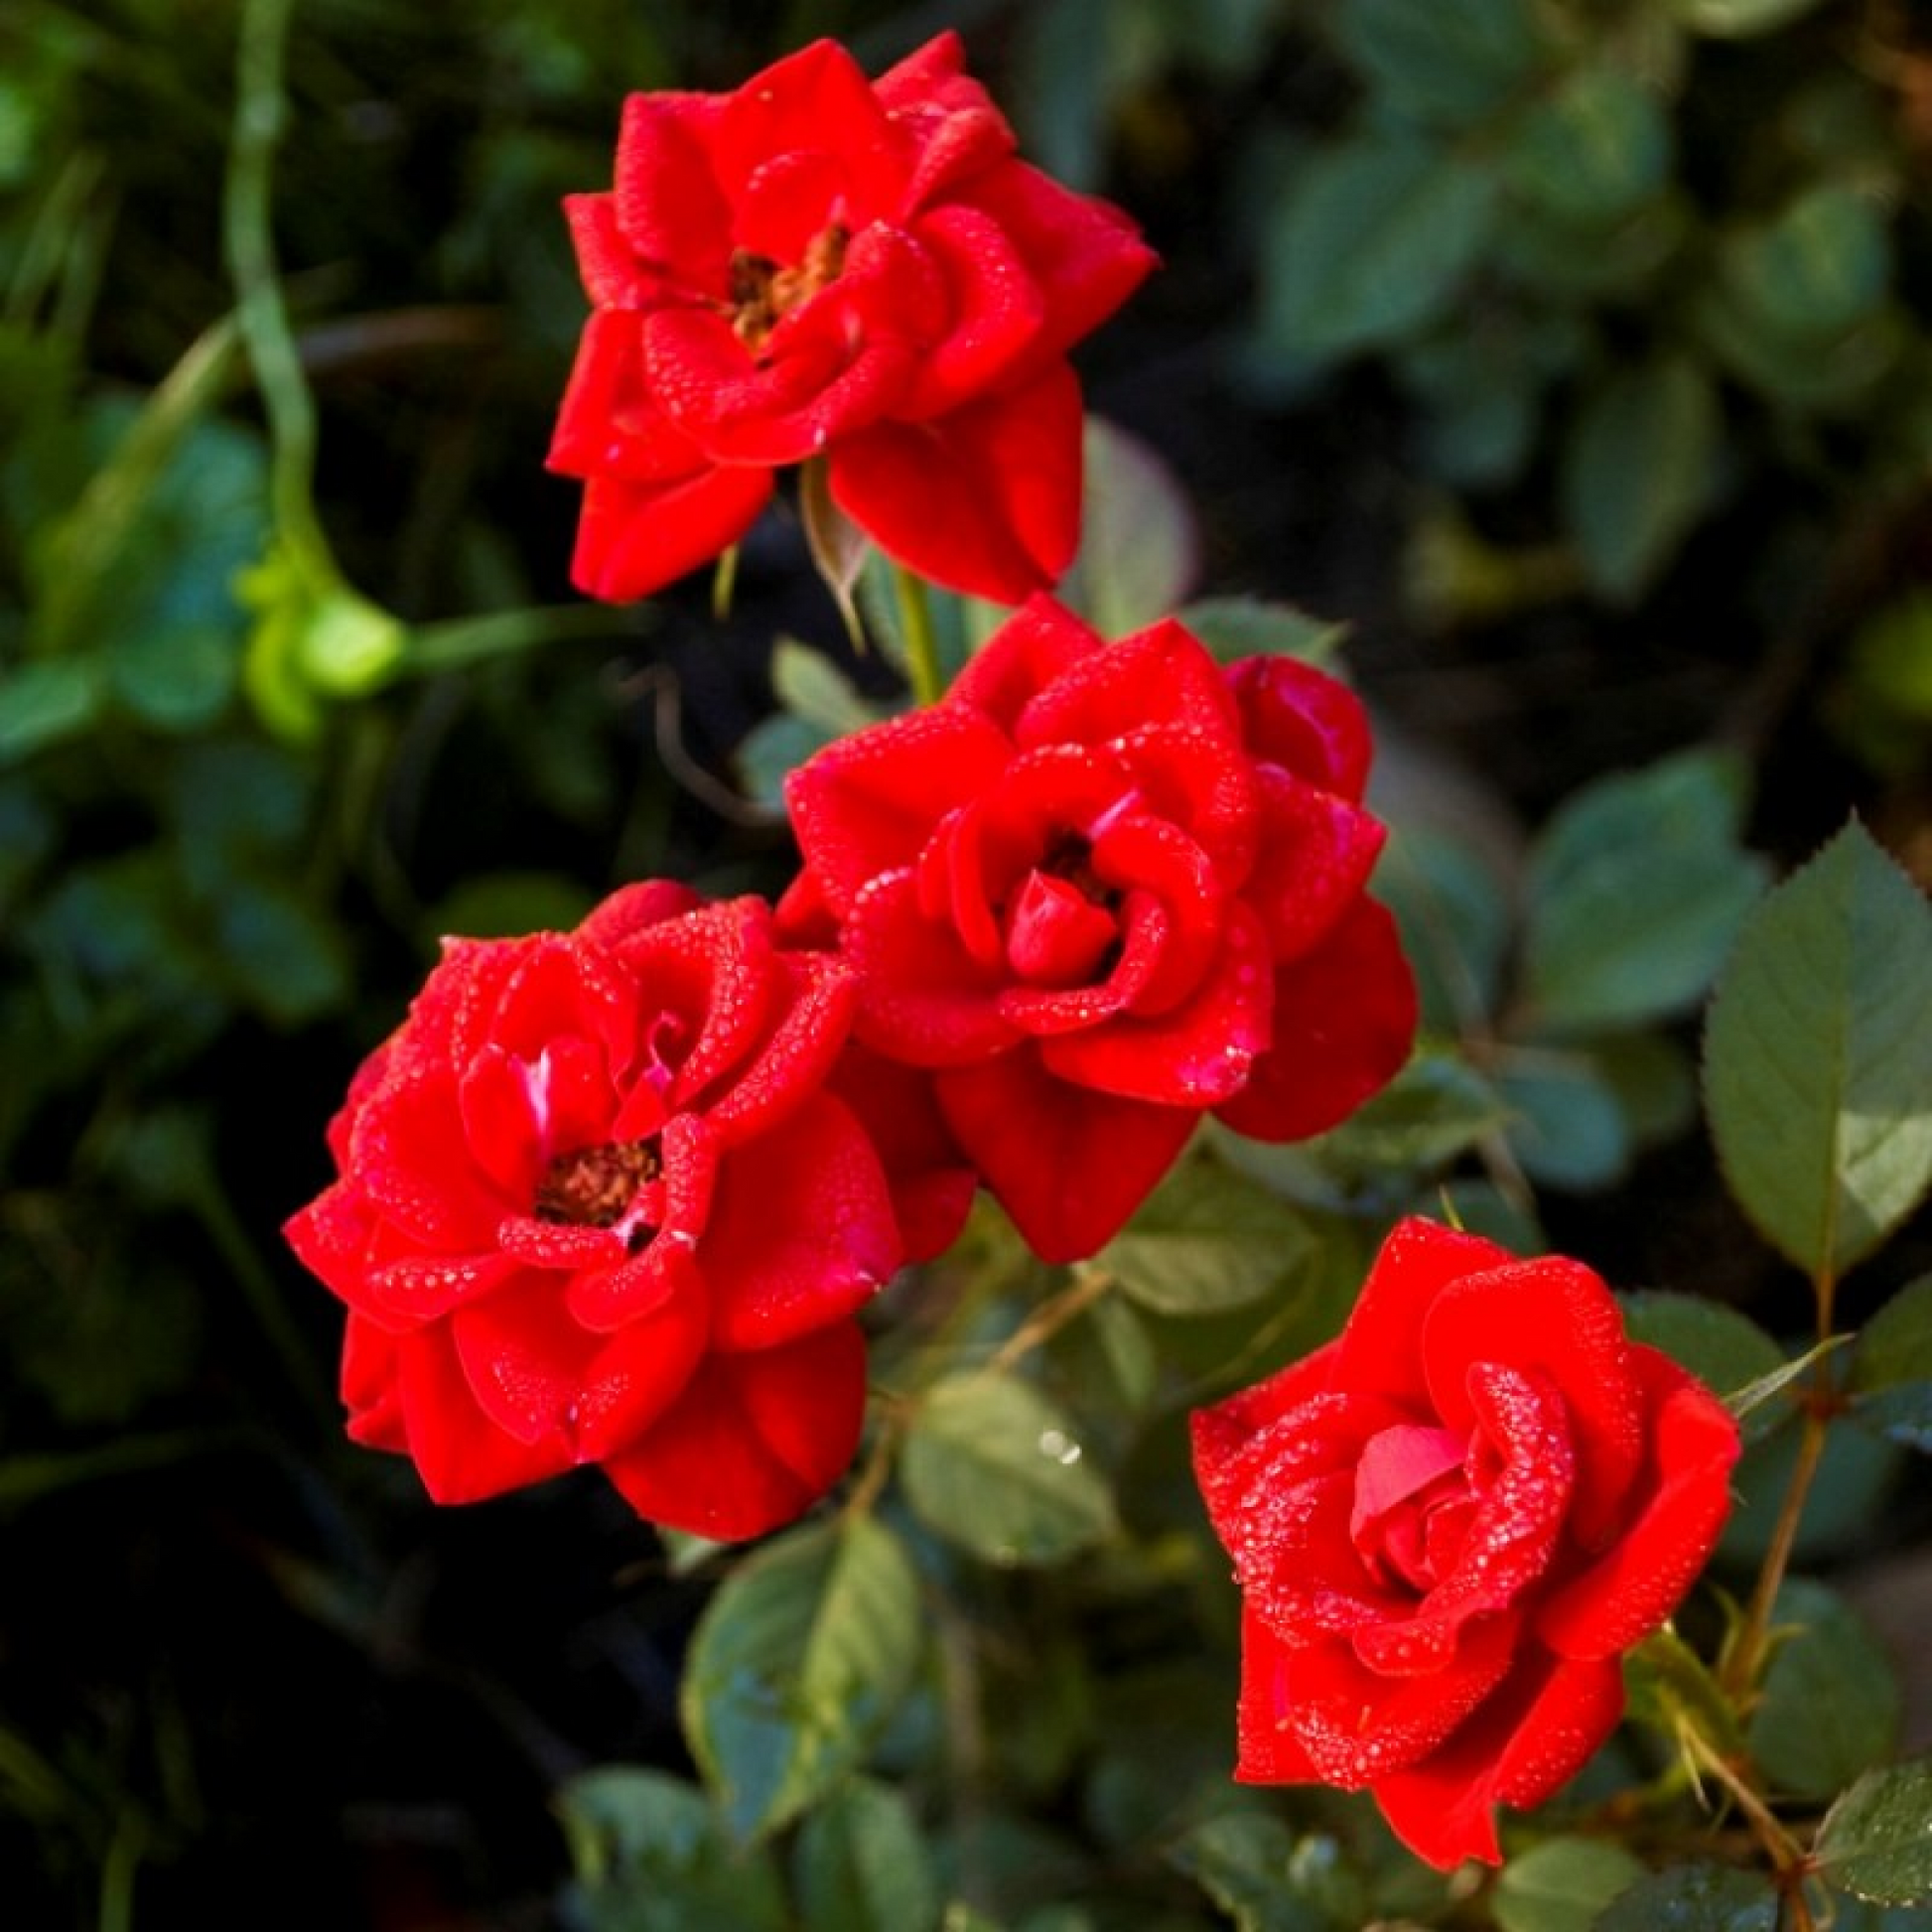 Miniature Button Rose (Red) Plant